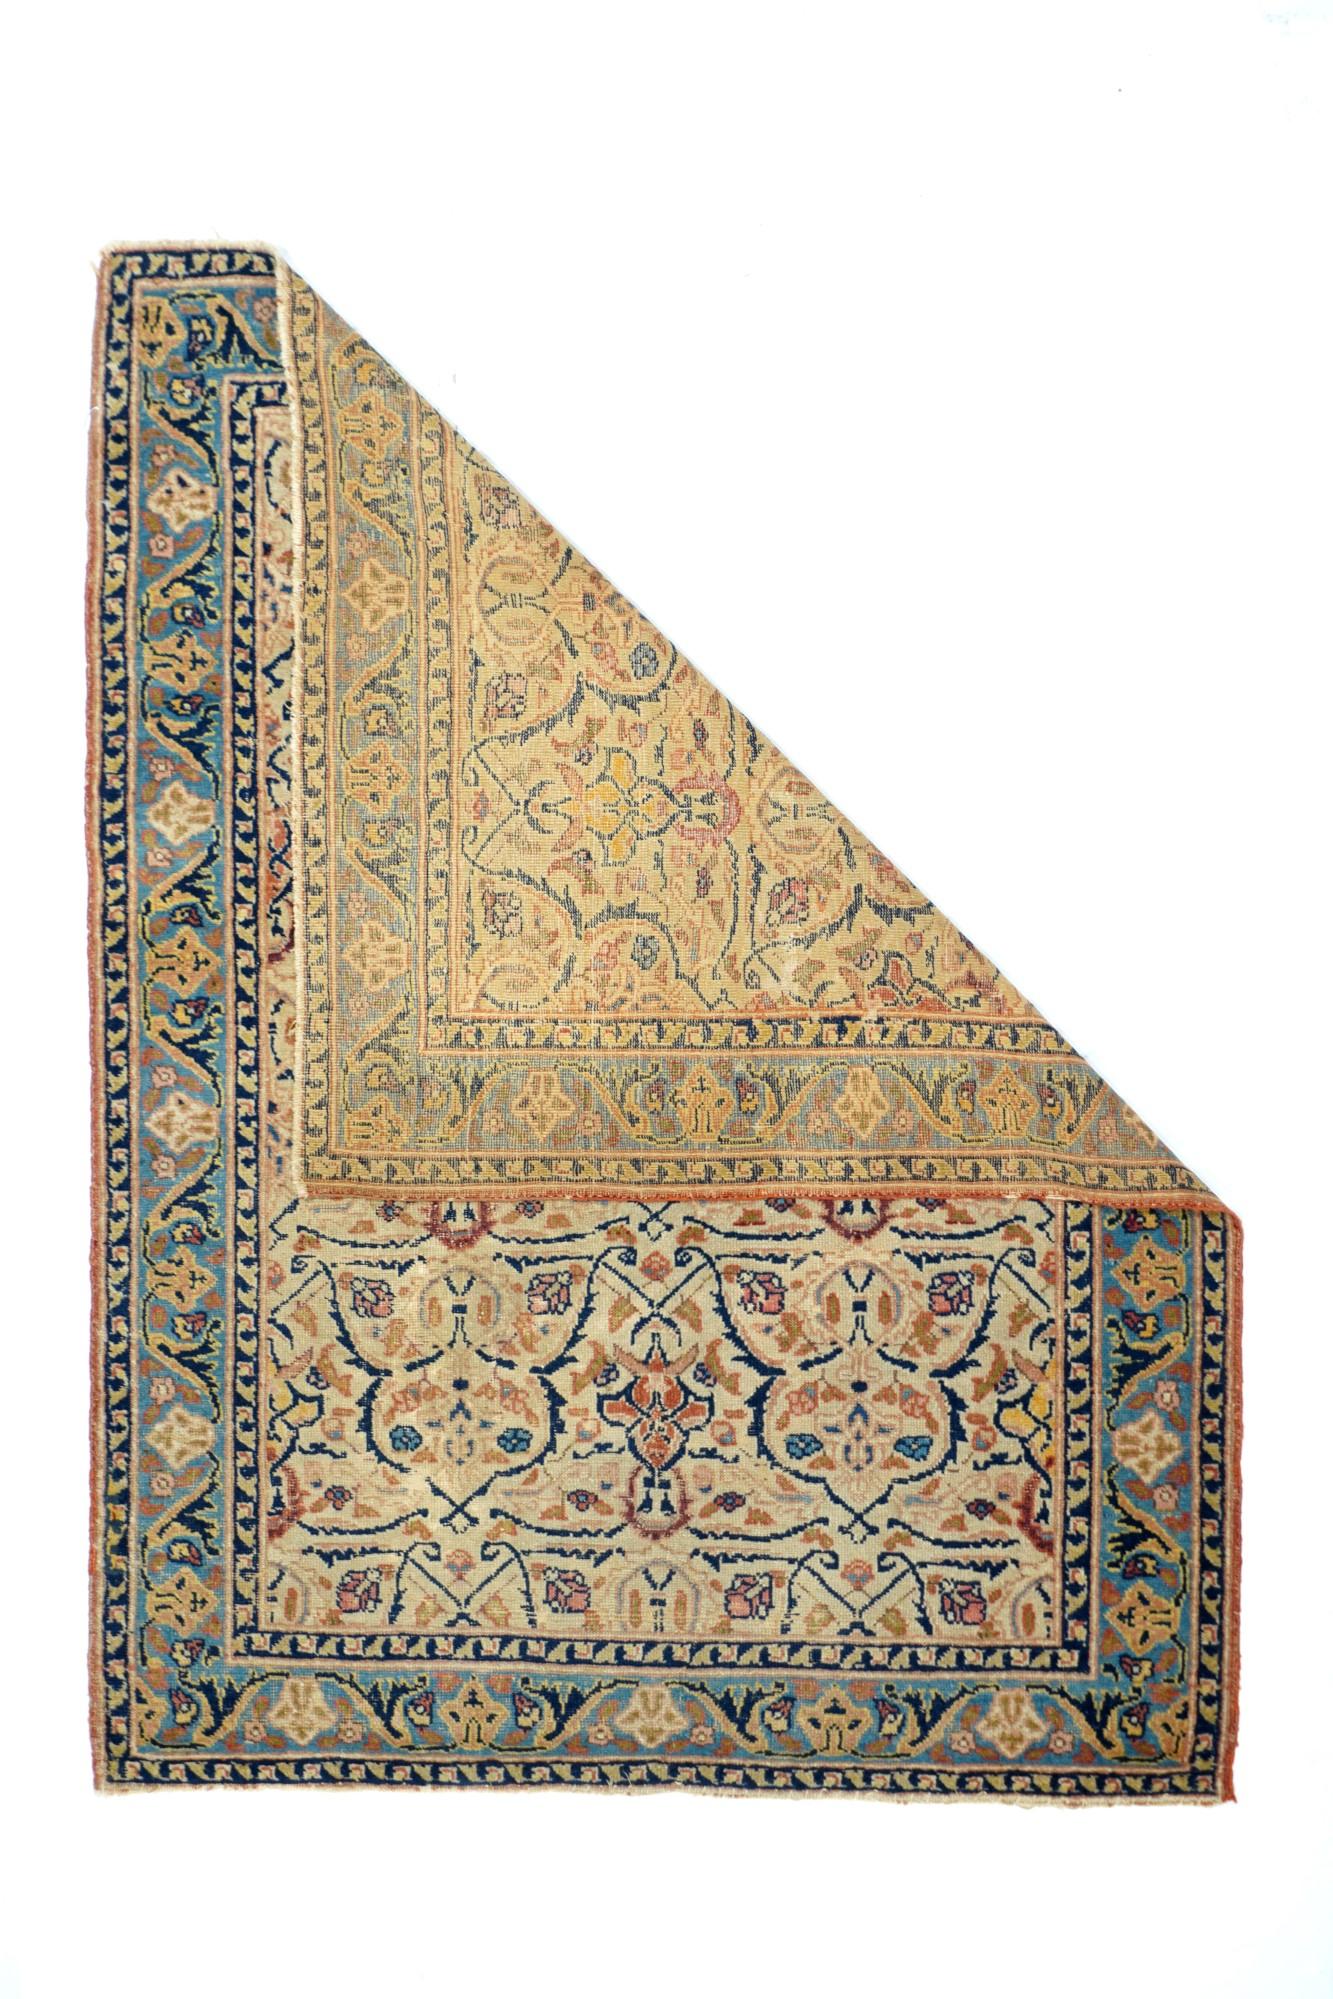 The Afshar tribes probably have the largest collective design repertoire of any nomadic or village group. In this attractive example, the pattern is reminiscent of Mahal carpets, with an ecru field supporting a large textile repeat of acanthus edged